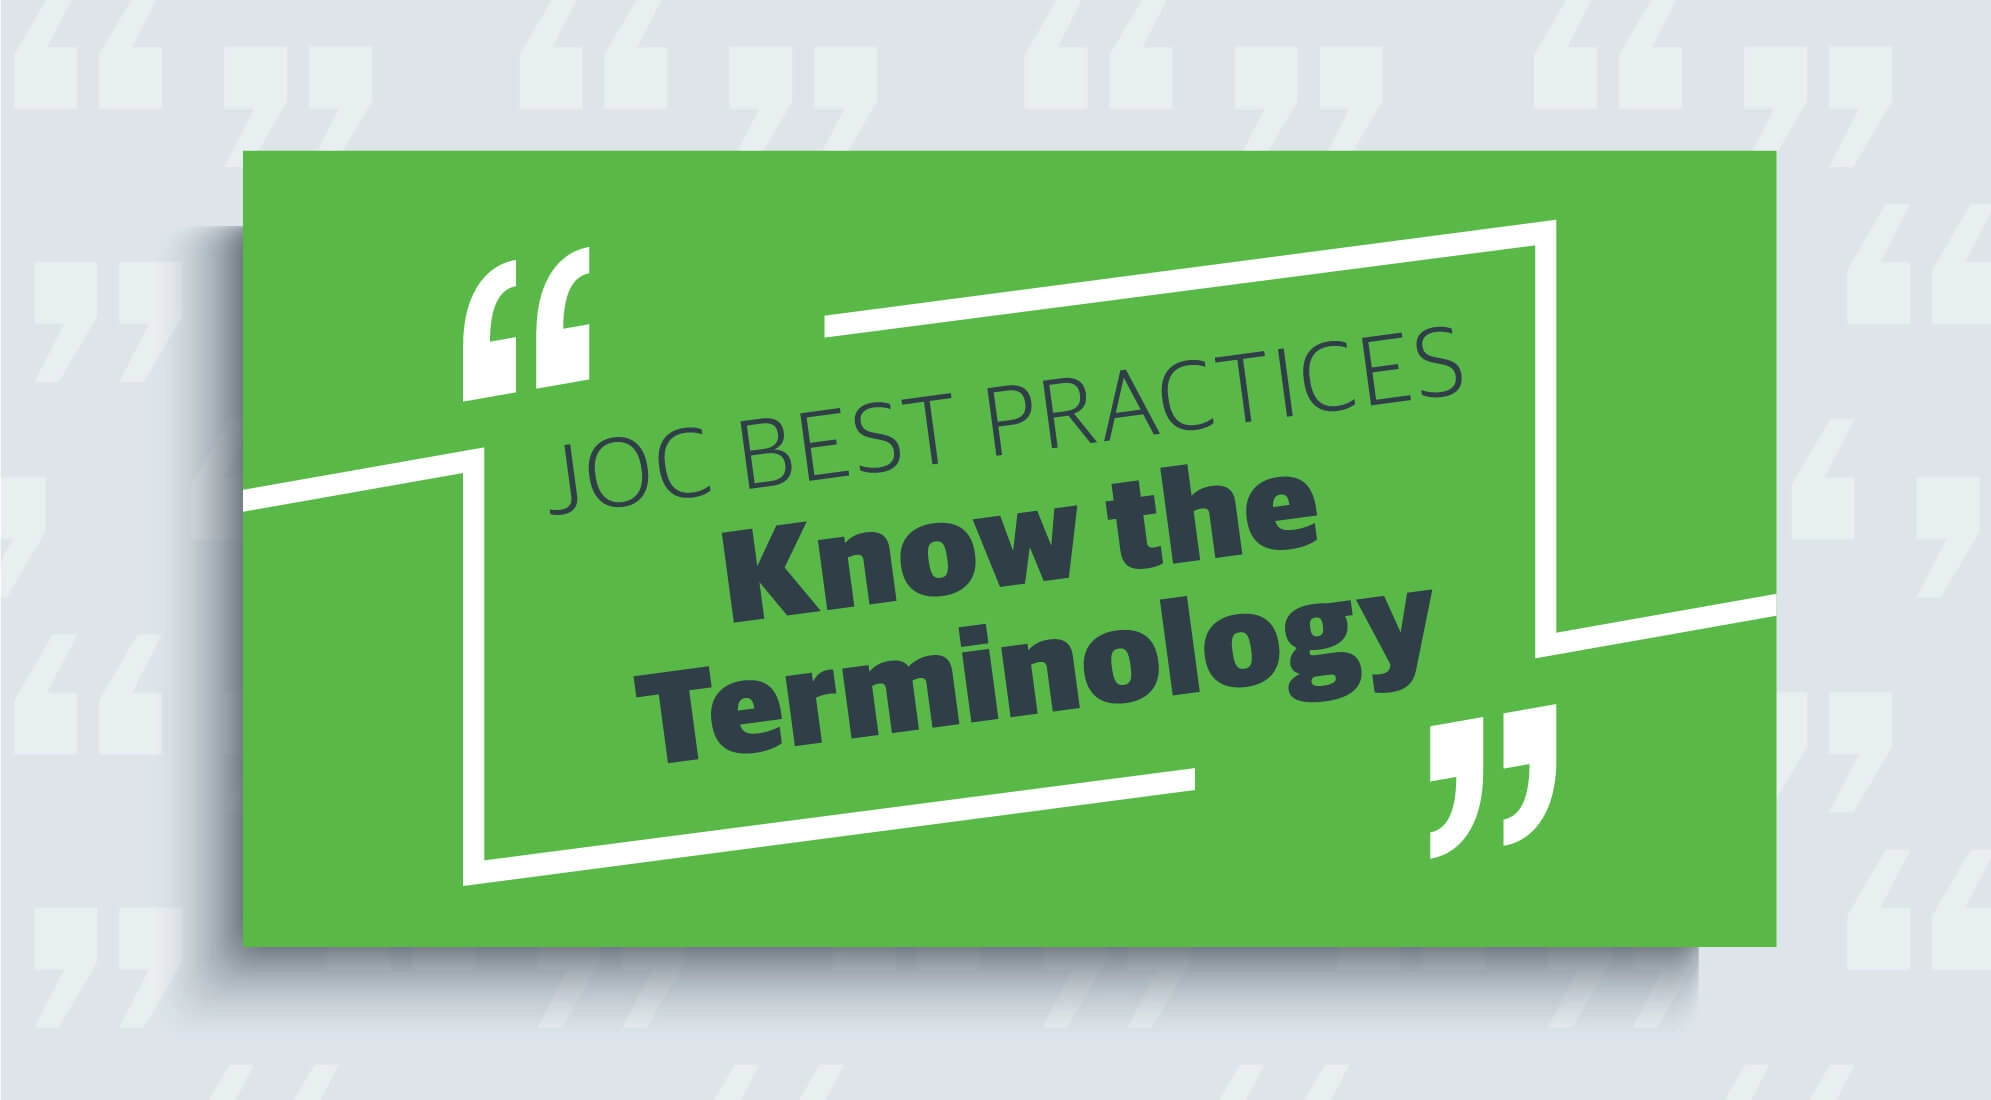 JOC Best Practices: 12 Key Terms for Job Order Contracting